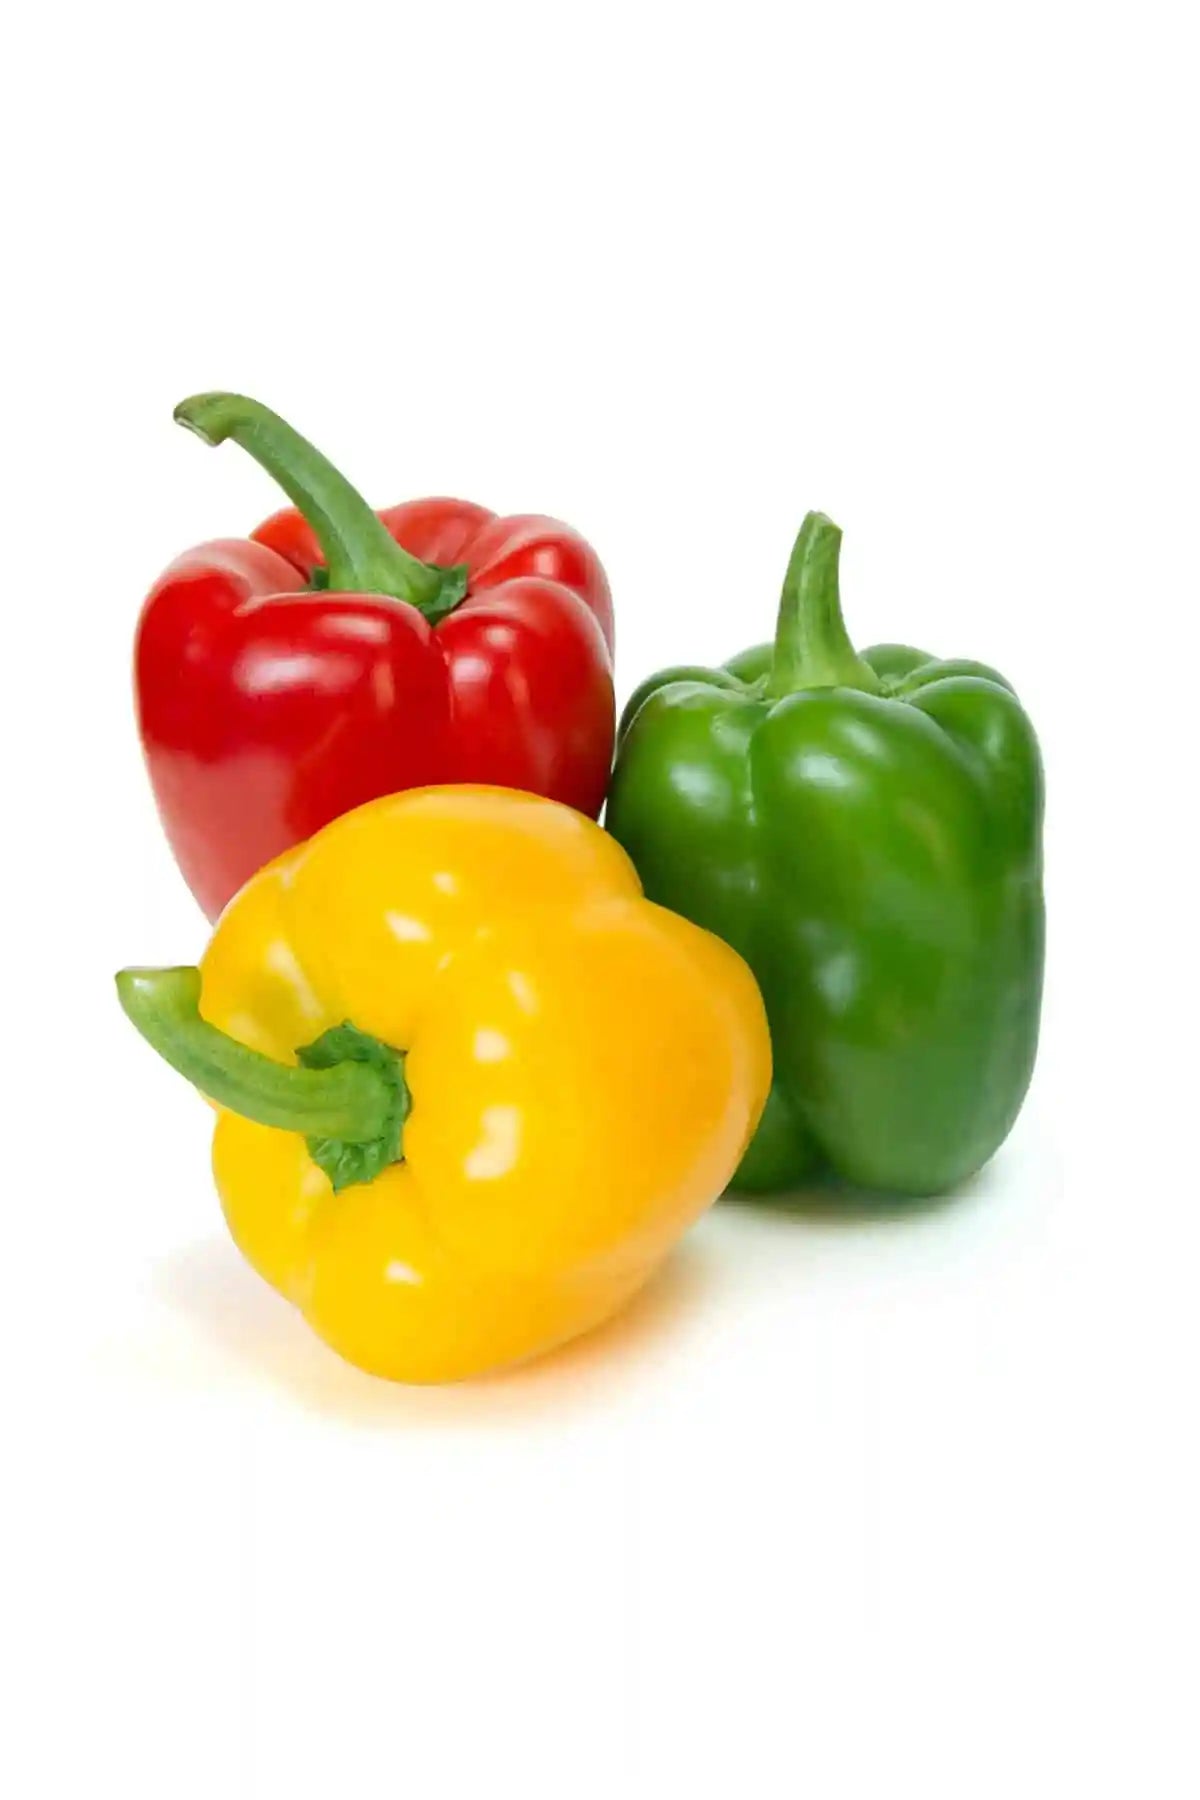 Sweet Bell Peppers are the most popular peppers for growing and cooking. his variety is a small version of the grocery store standard, it is easy